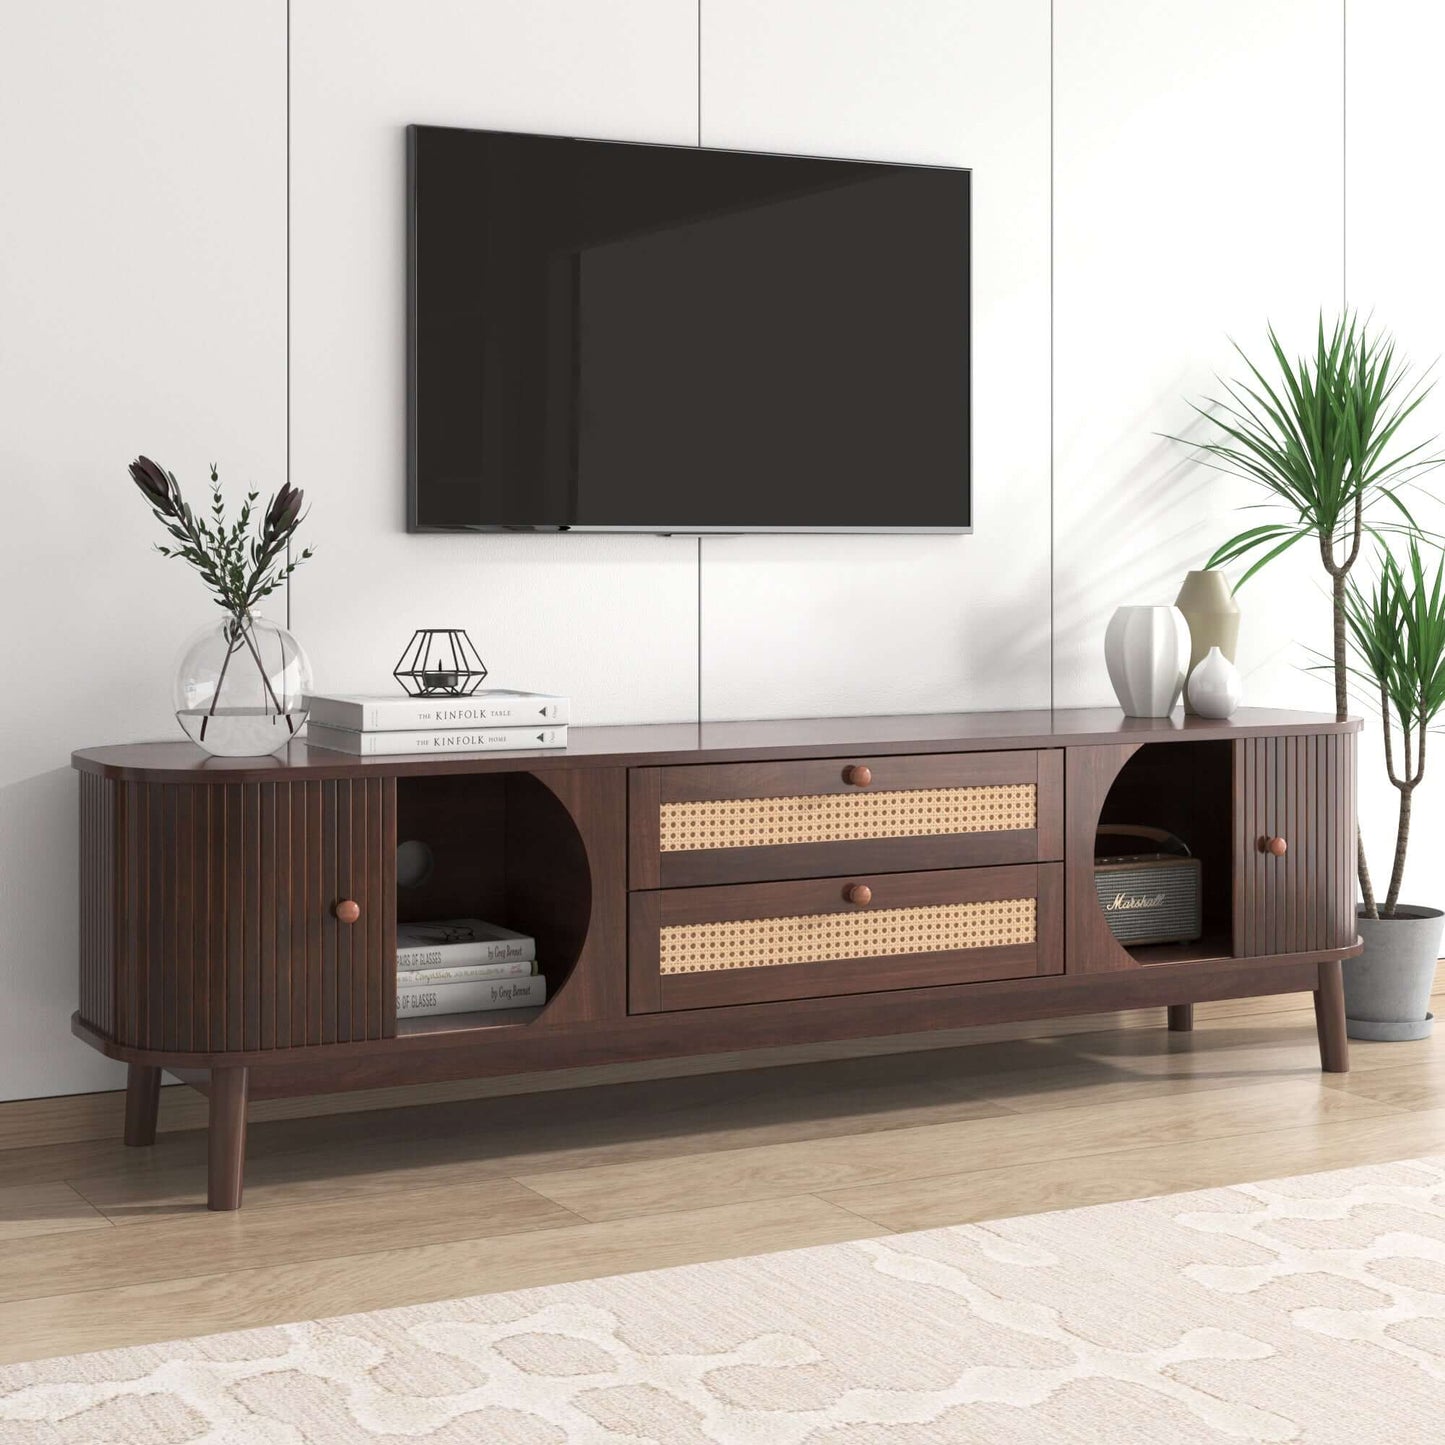 MCM Styled TV Stand Entertainment Center Solid Wood & MDF, Brown 67" - Revel Sofa 